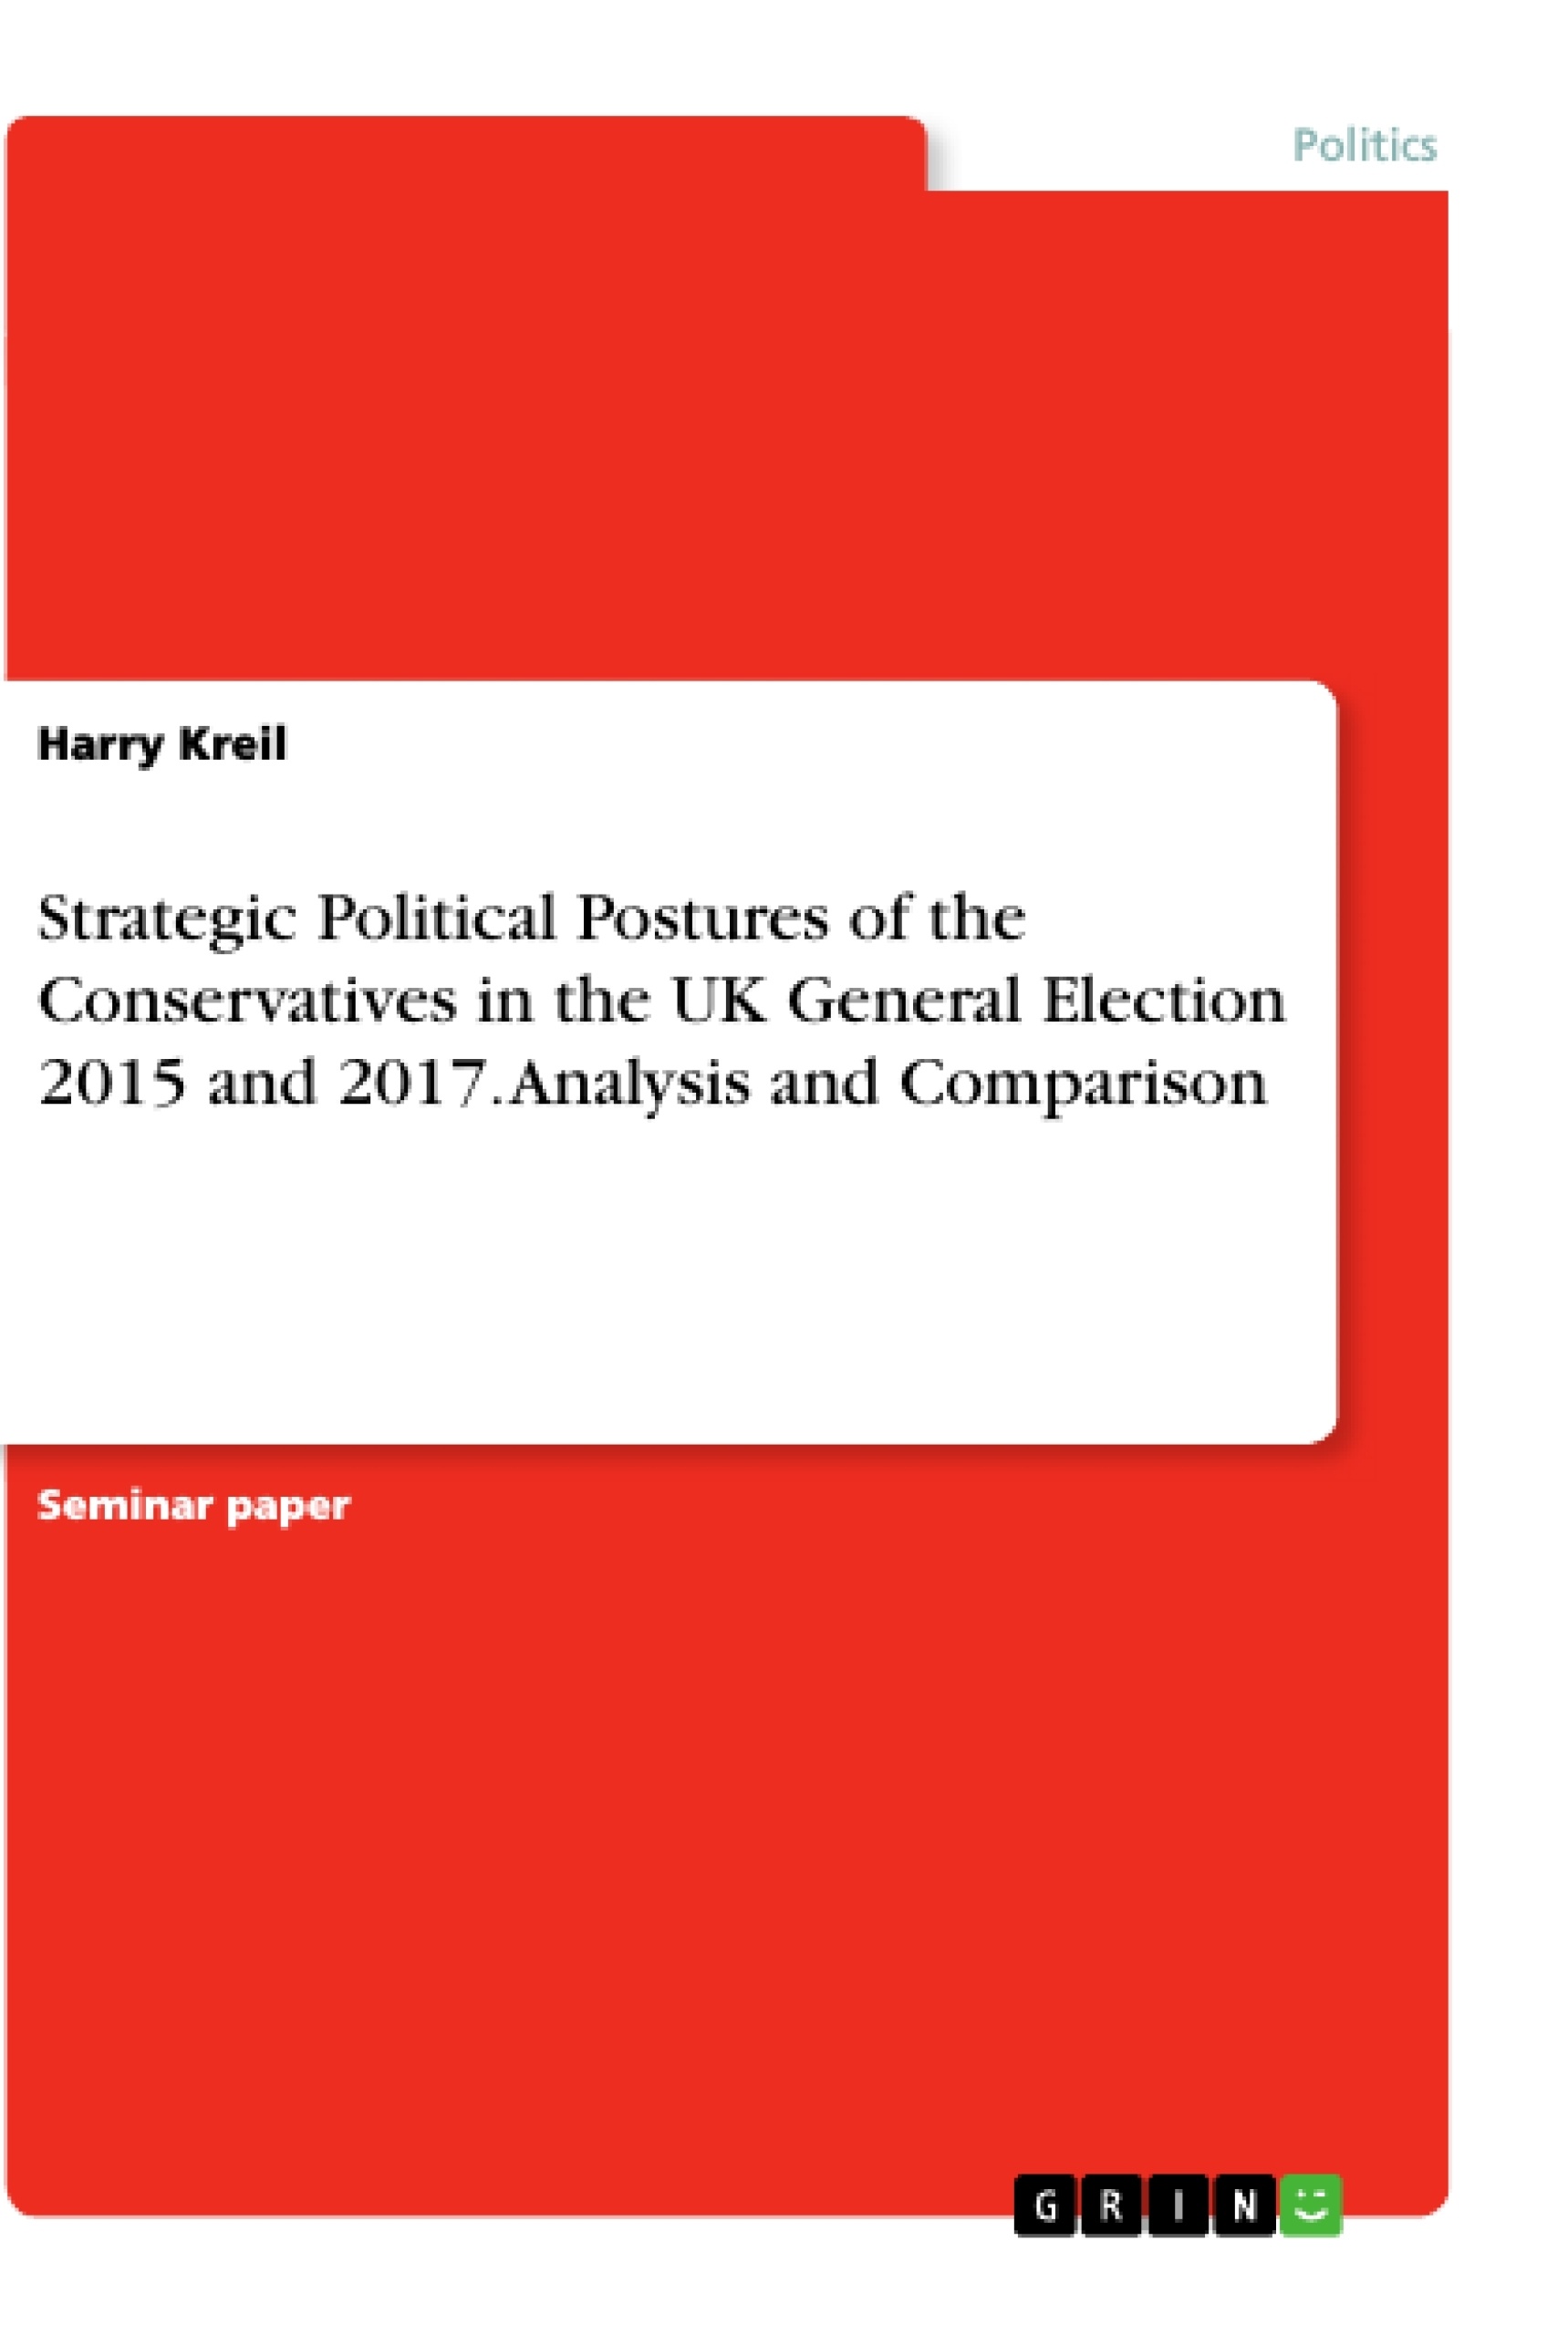 Title: Strategic Political Postures of the Conservatives in the UK General Election 2015 and 2017. Analysis and Comparison